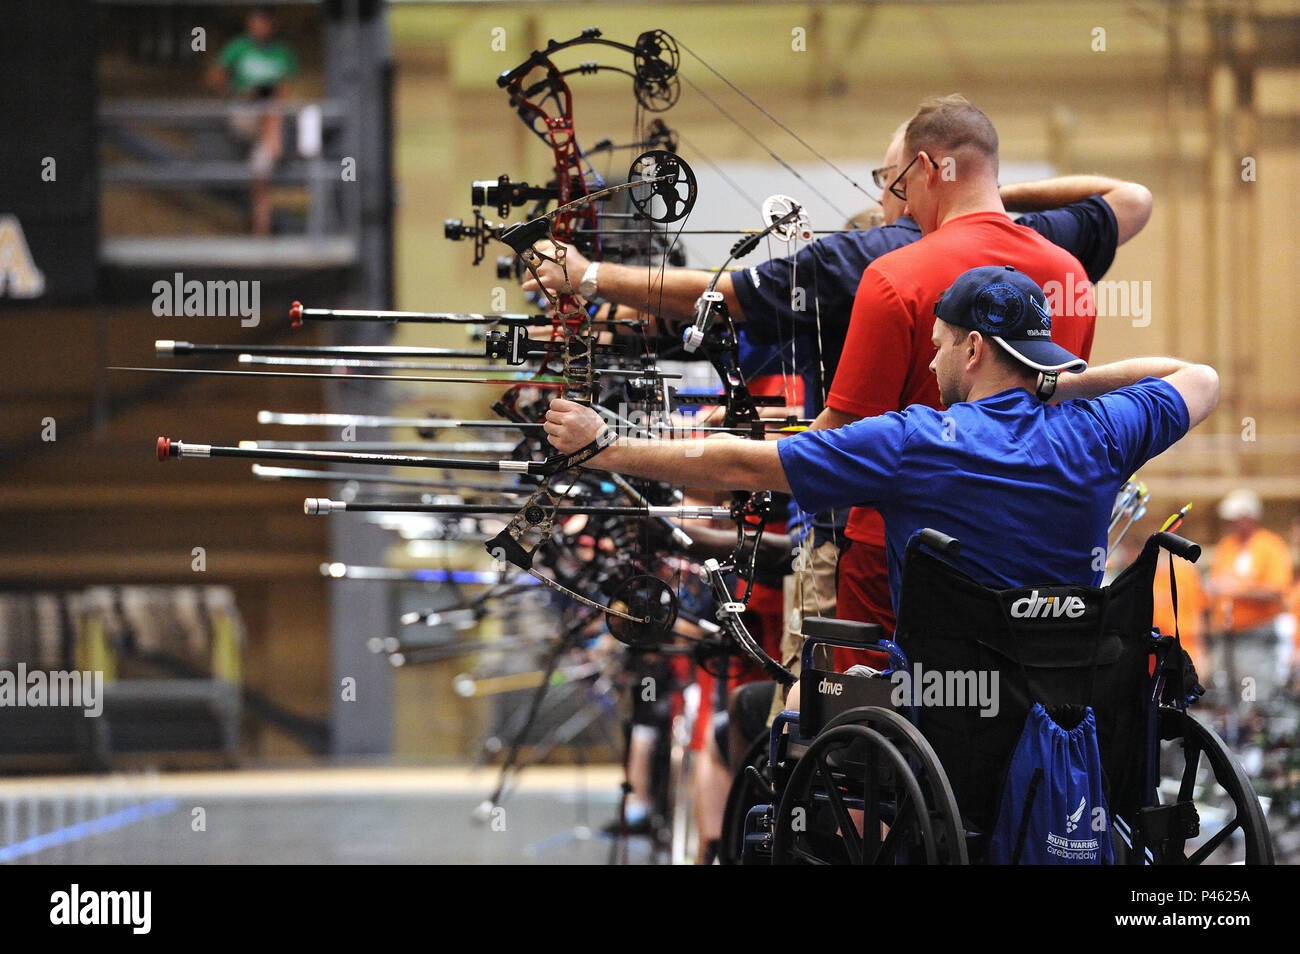 U.S. Air Force Retired Tech. Sgt.  Brian Schaaf from Oxford, England, releases an arrow during the archery competition at the 2016 DoD Warrior Games held at U.S. Military Academy at West Point, N.Y., June 17, 2016. The DoD Warrior Games, June 15-21, is an adaptive sports competition for wounded, ill and injured service members and Veterans. Athletes representing teams from the Army, Marine Corps, Navy, Air Force, Special Operations Command and the United Kingdom Armed Forces compete in archery, cycling, track and field, shooting, sitting volleyball, swimming, and wheelchair basketball. (U.S. A Stock Photo